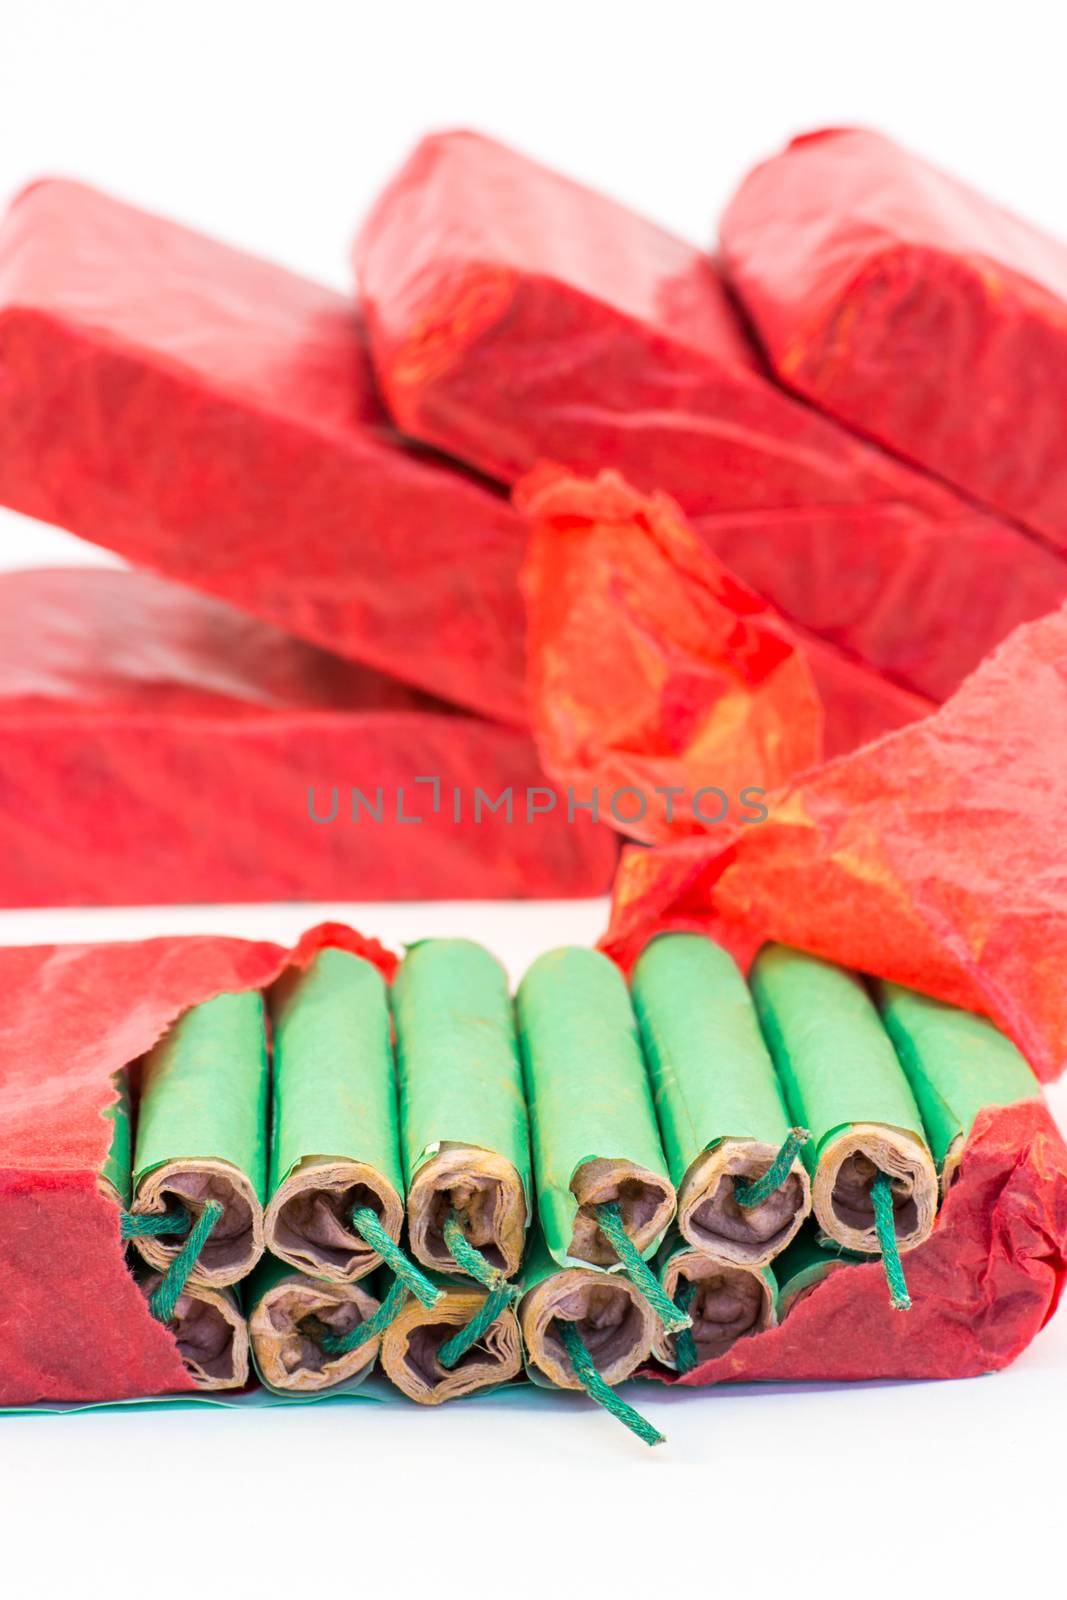 Red packets with stack of green firecrackers isolated on white background